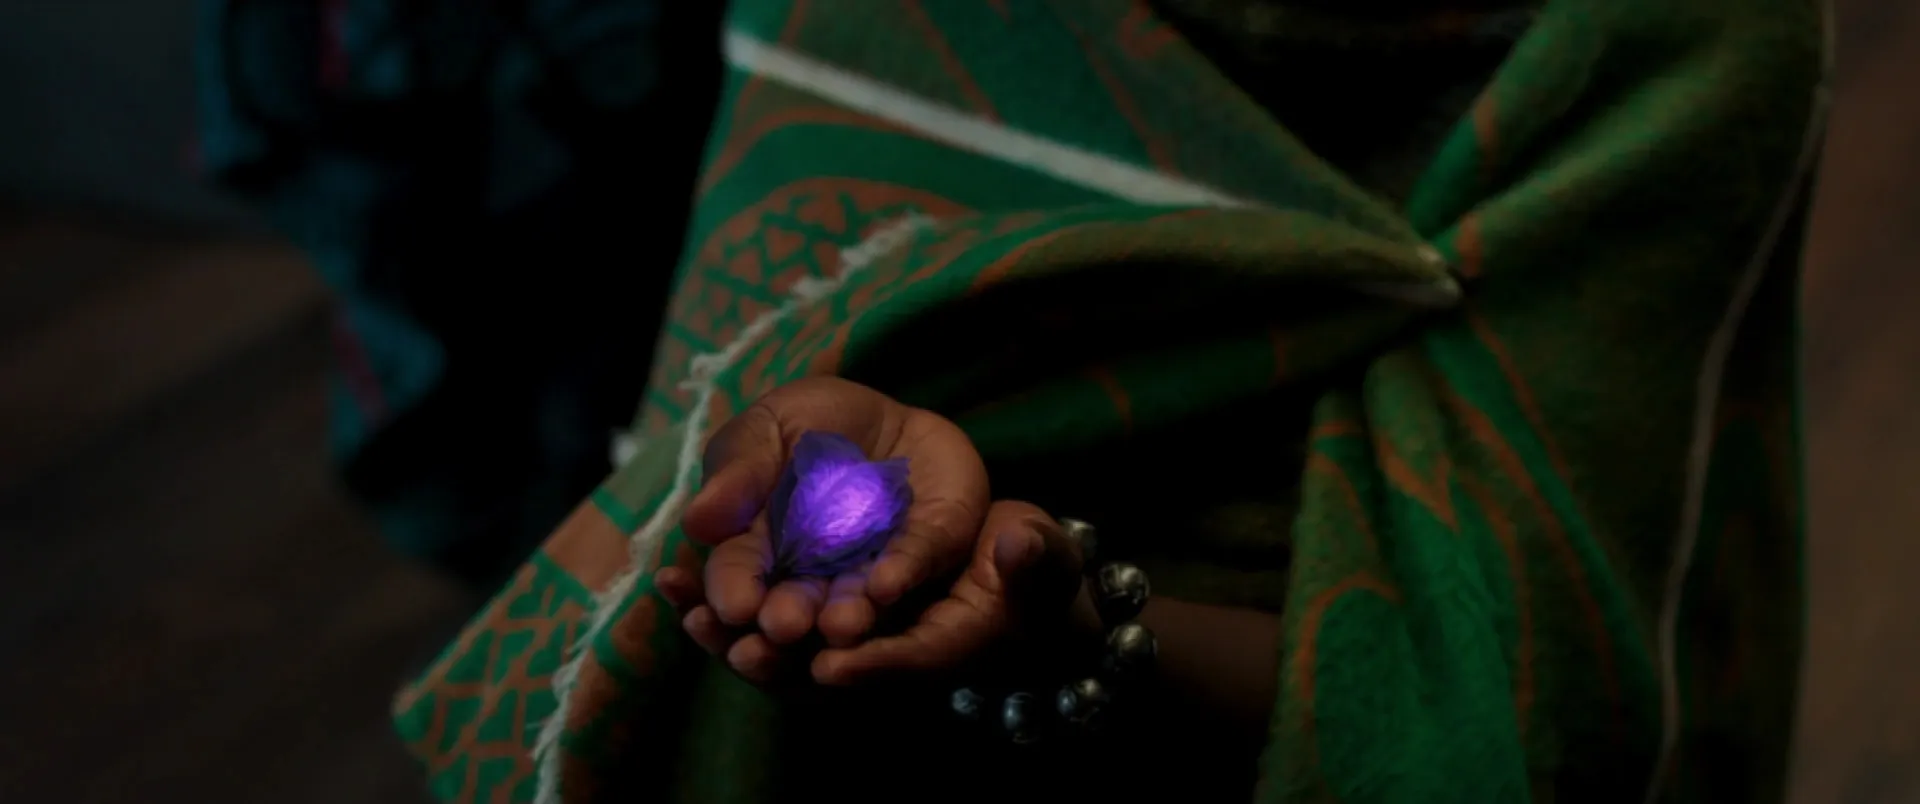 The heart-shaped herb in 'Black Panther'